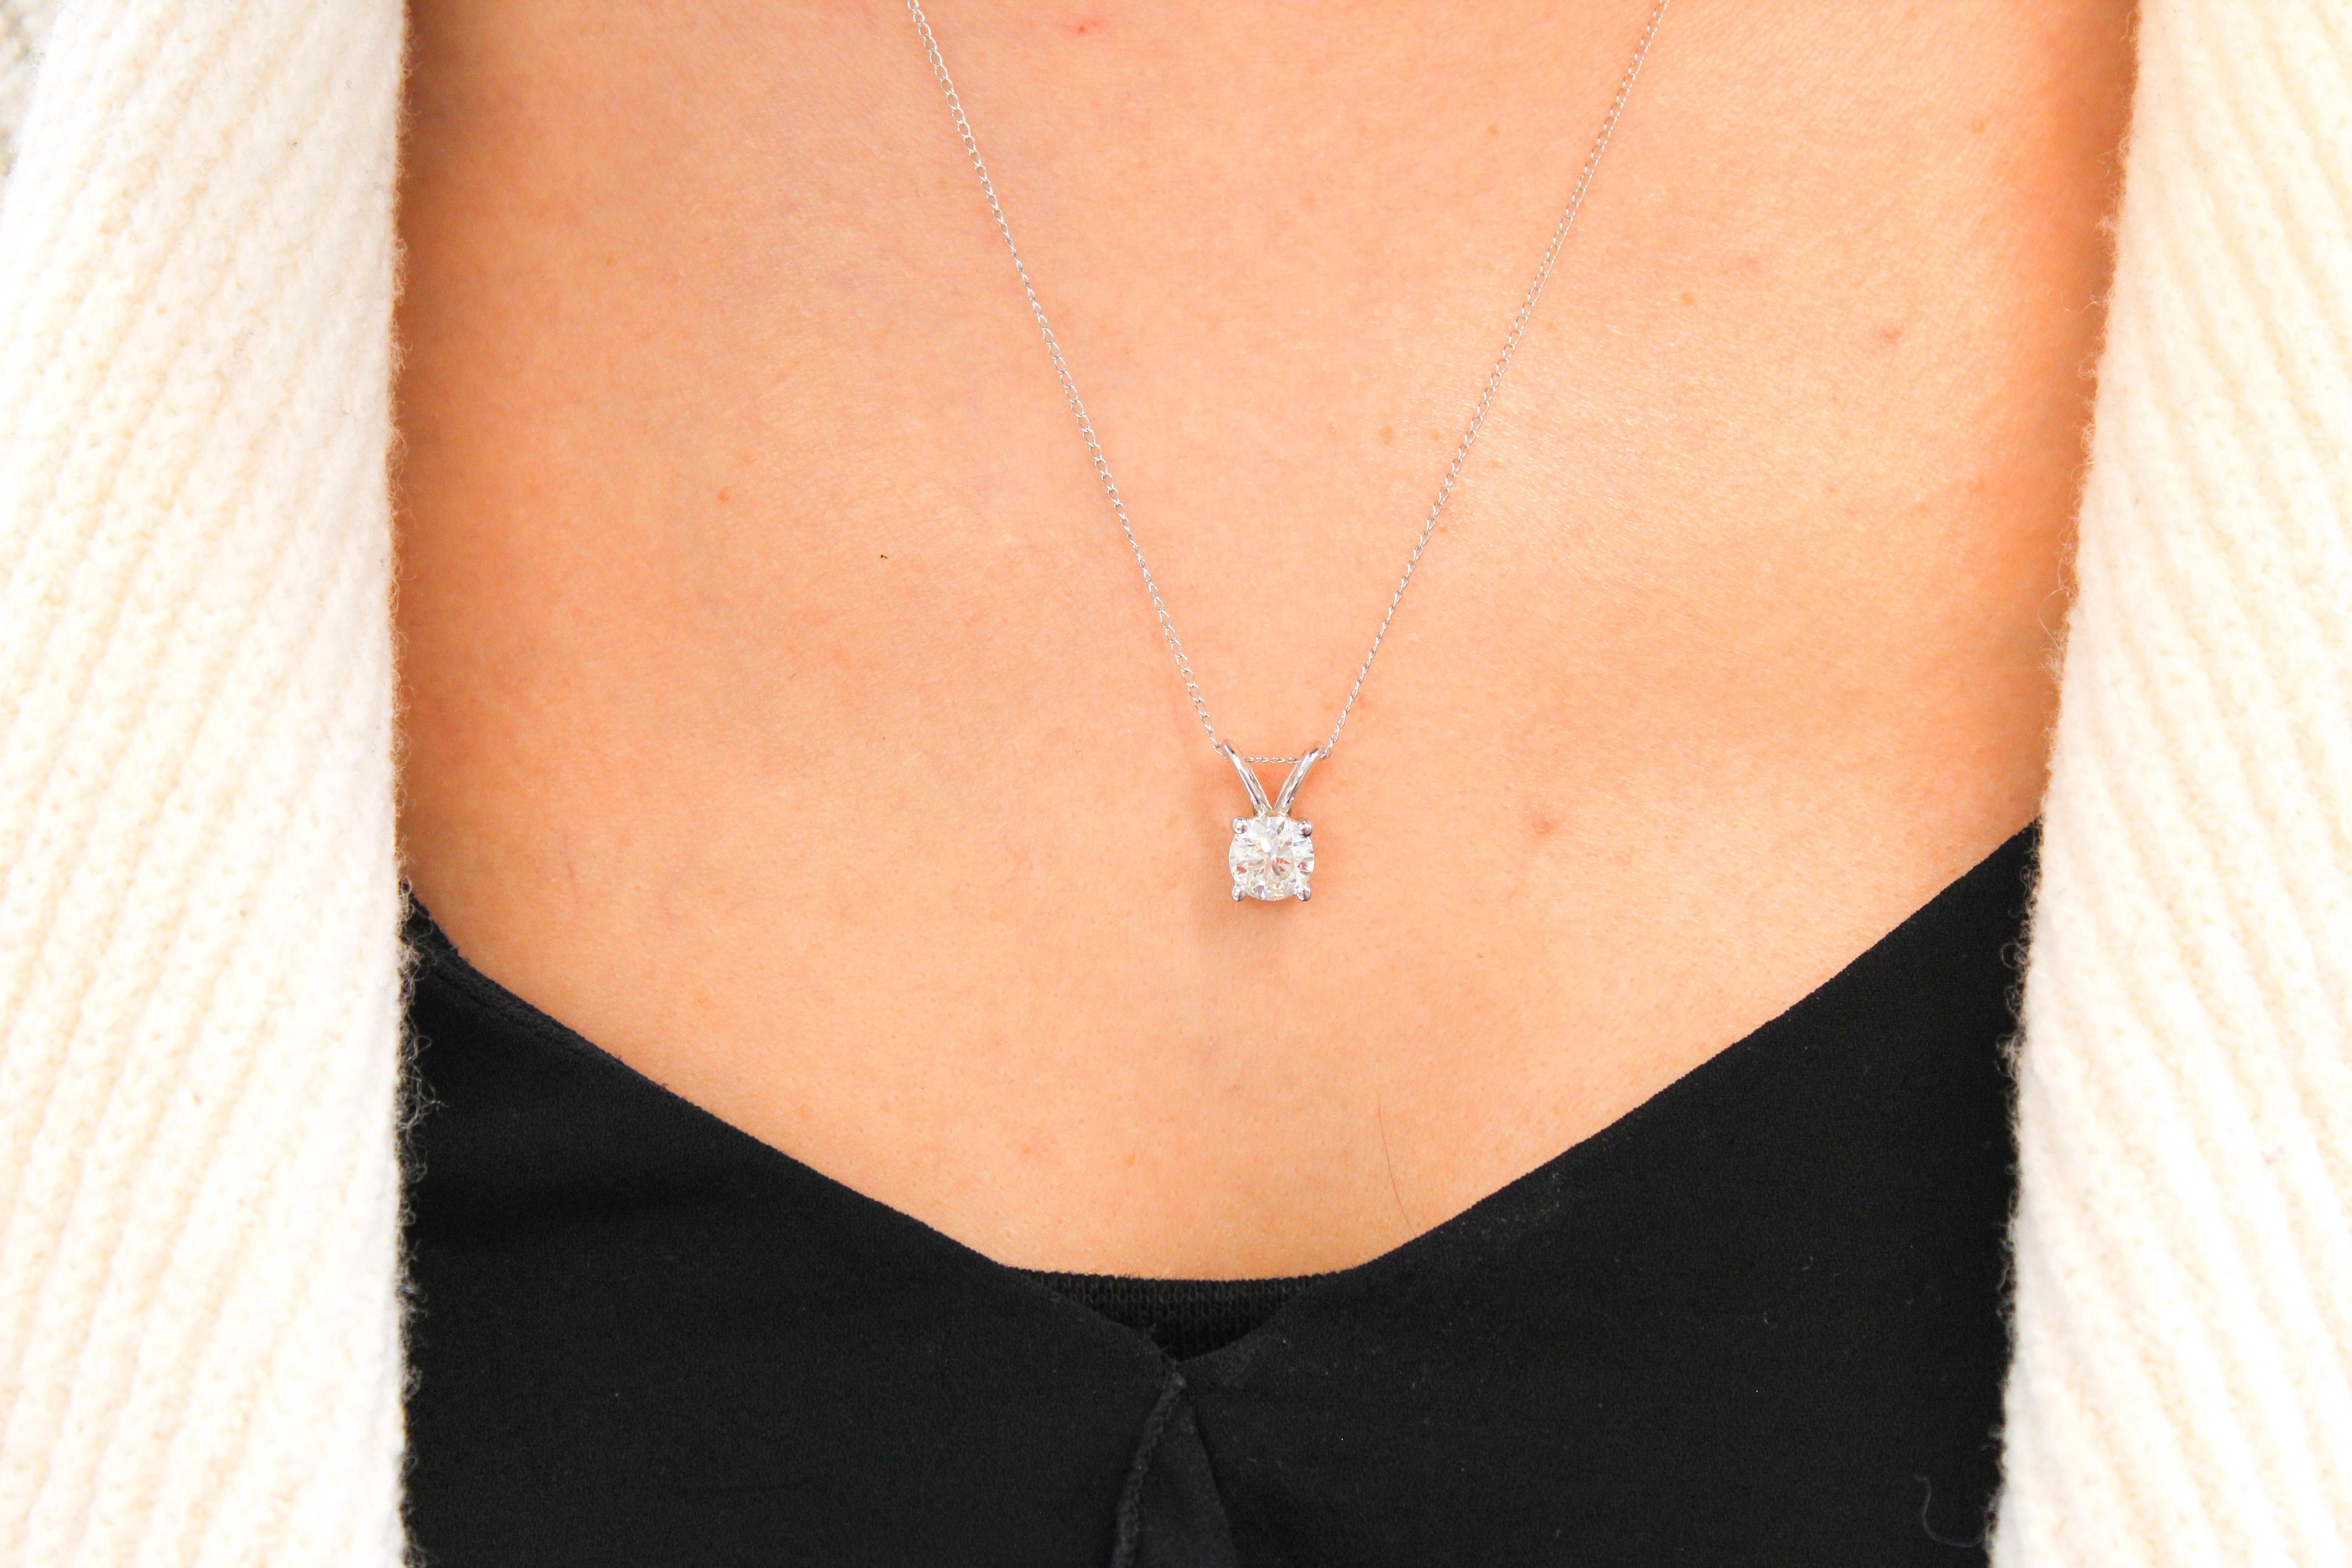 This impressive diamond solitaire pendant is finely crafted in brightly polished 14 karat rose gold and features a round shaped 0.25 carat diamond that has SI clarity, gracefully prong set on a shiny split bail. Ideal as an anniversary or birthday